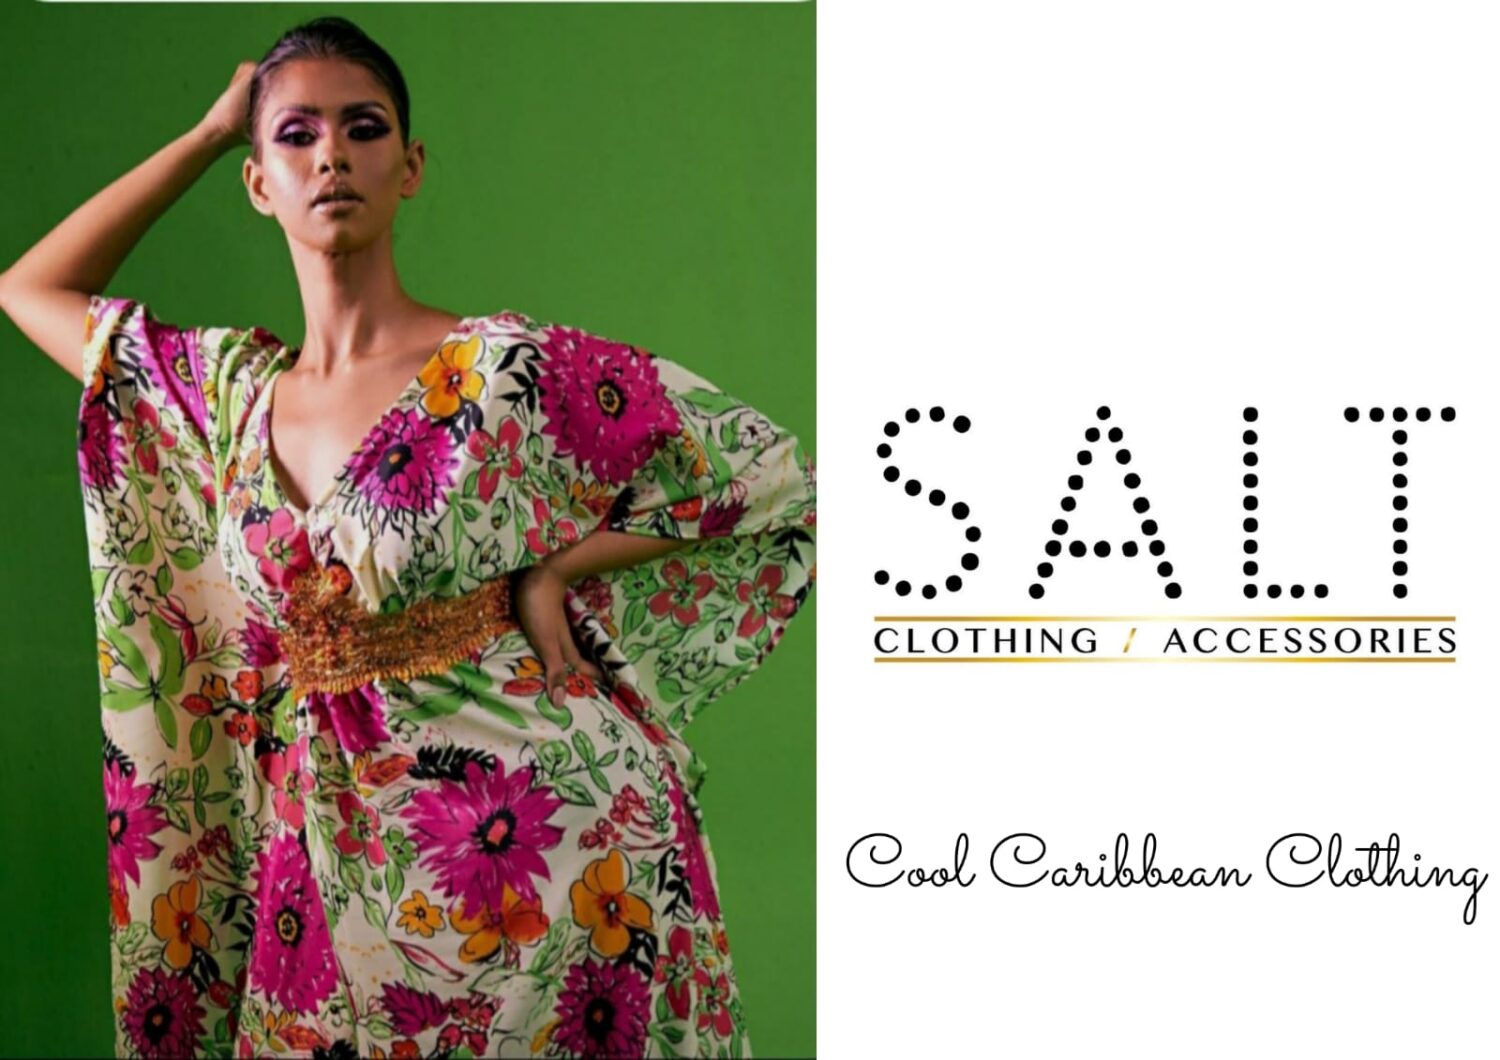 Salt Clothing and Accessories